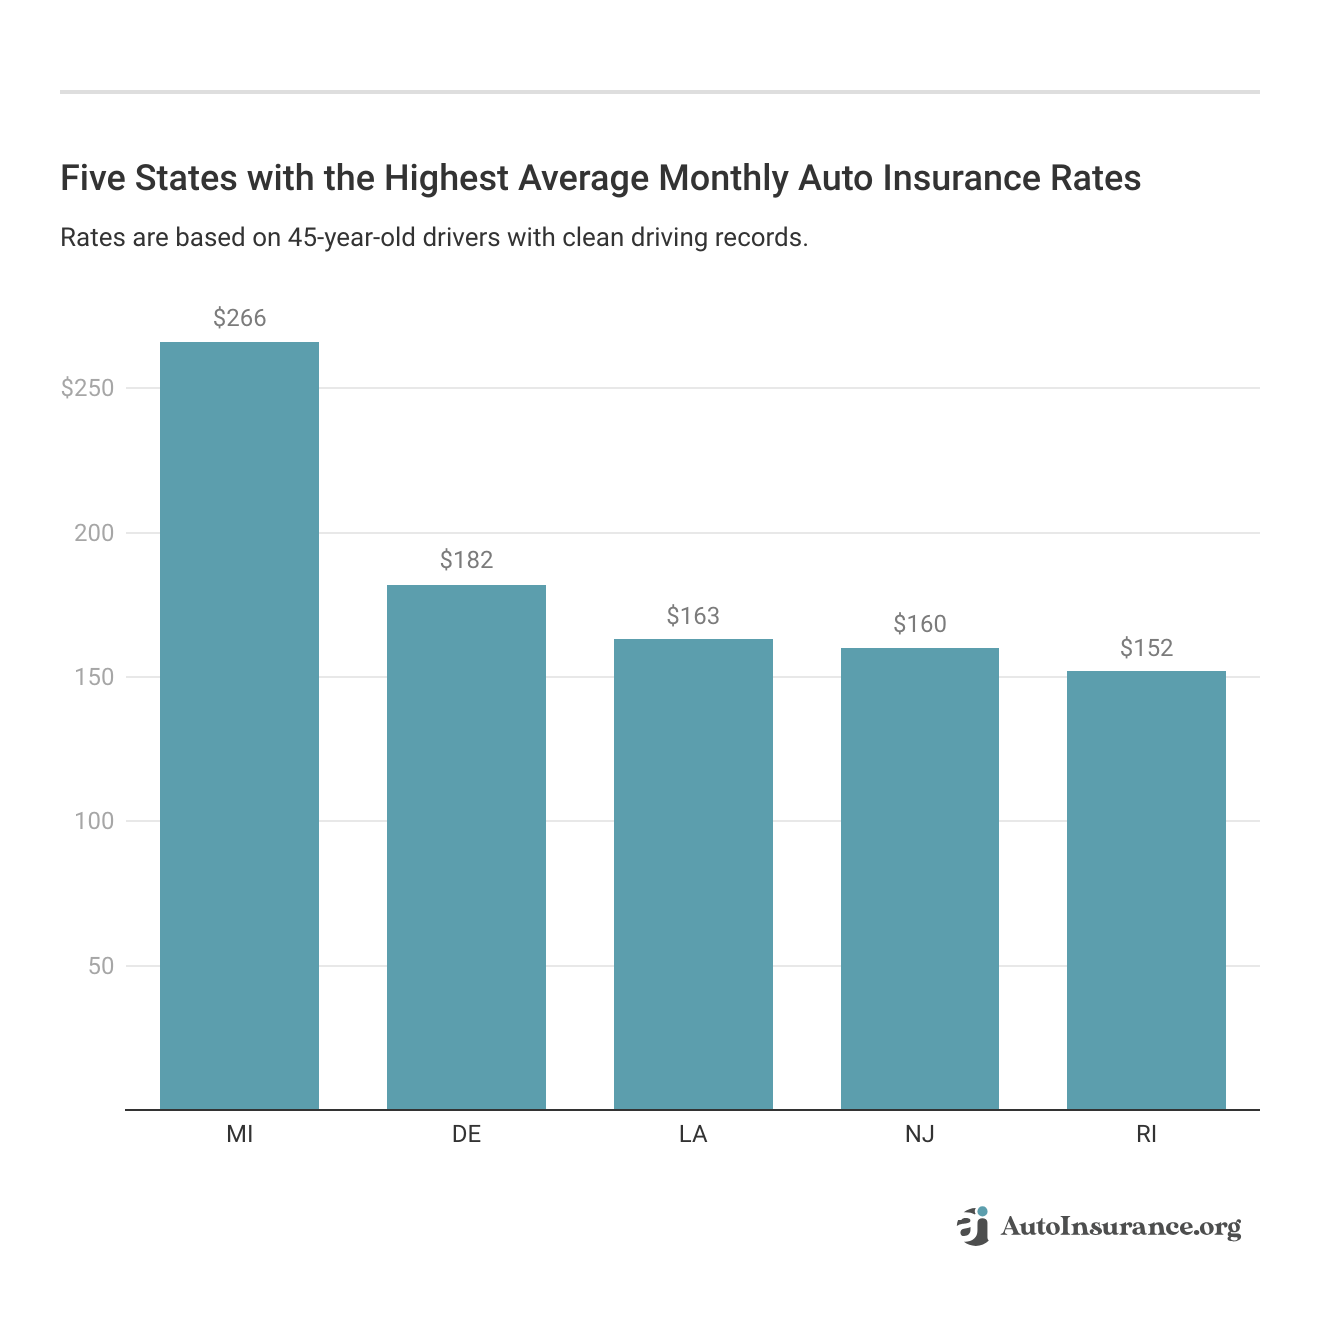 <h3>Five States with the Highest Average Monthly Auto Insurance Rates</h3>